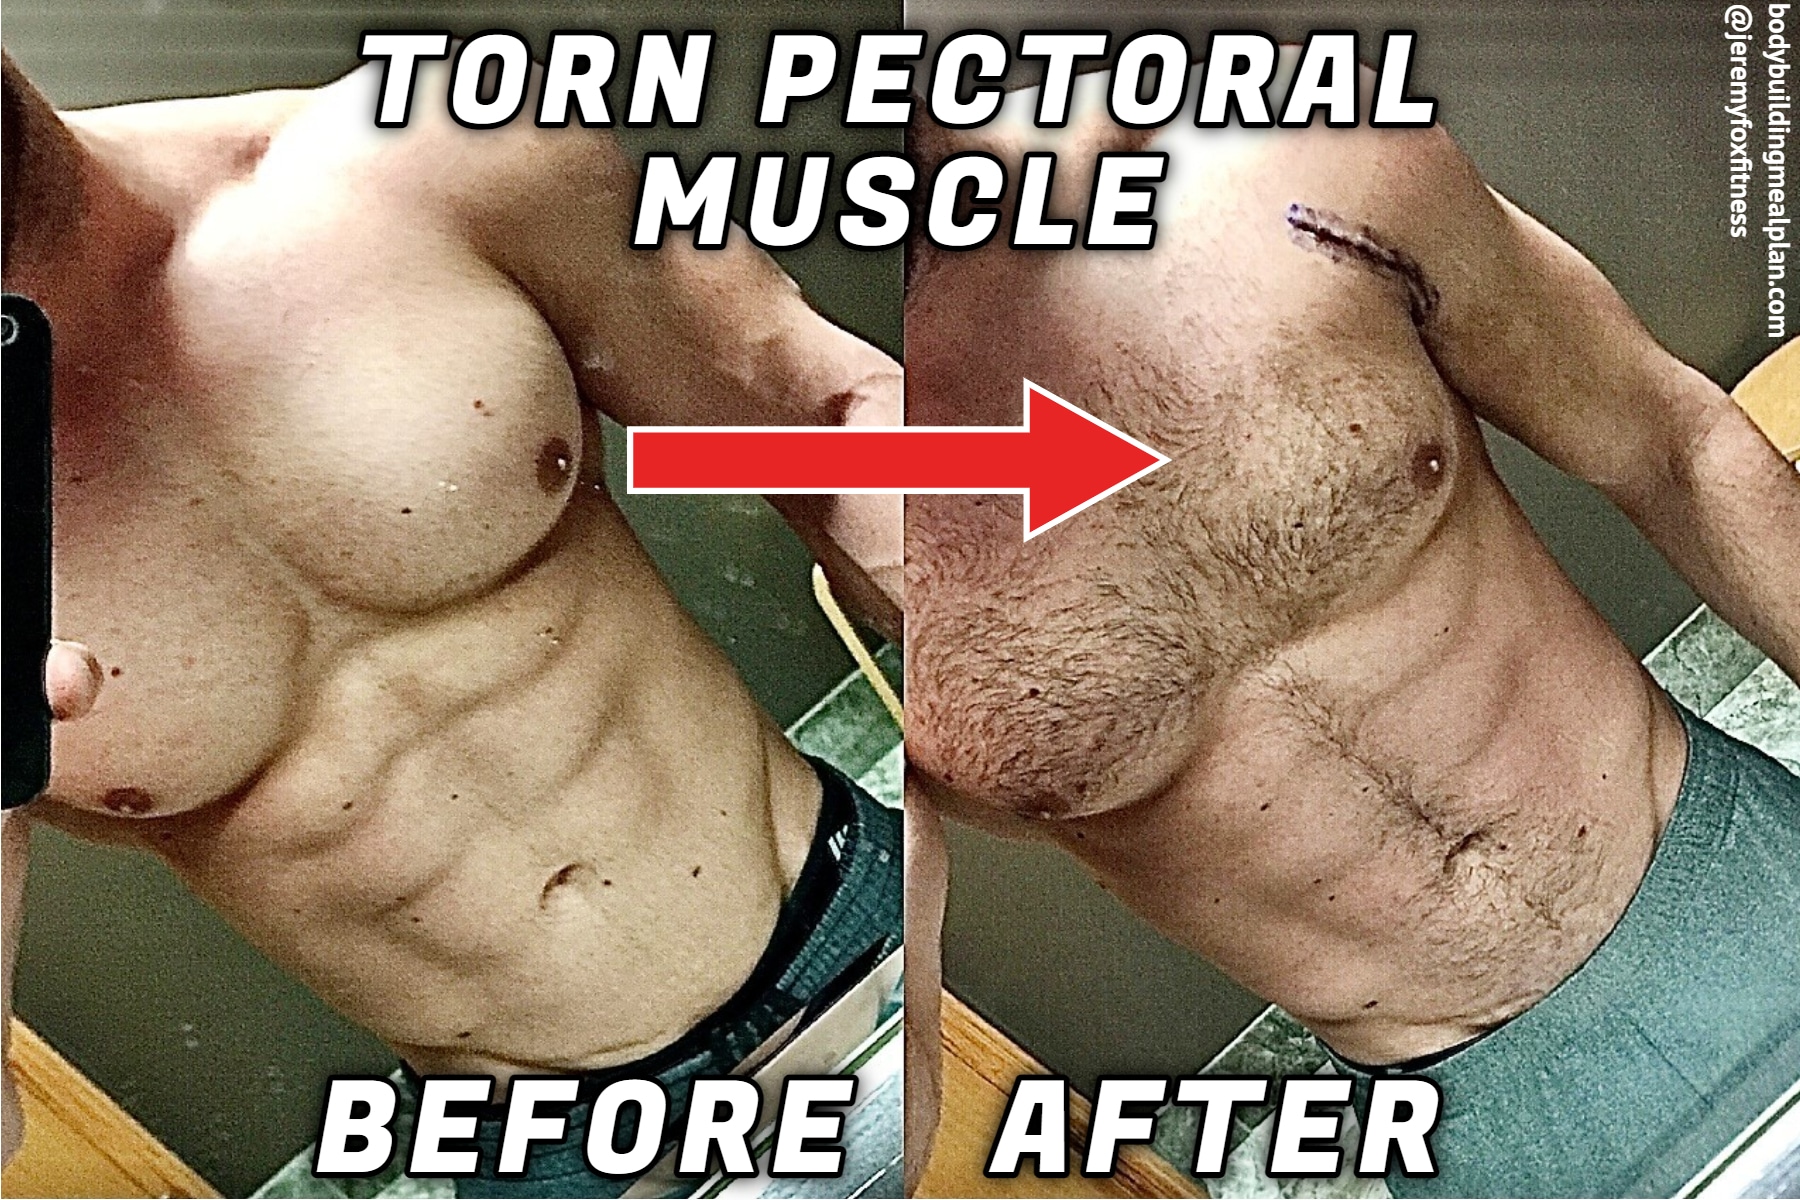 Torn Pectoral Muscle